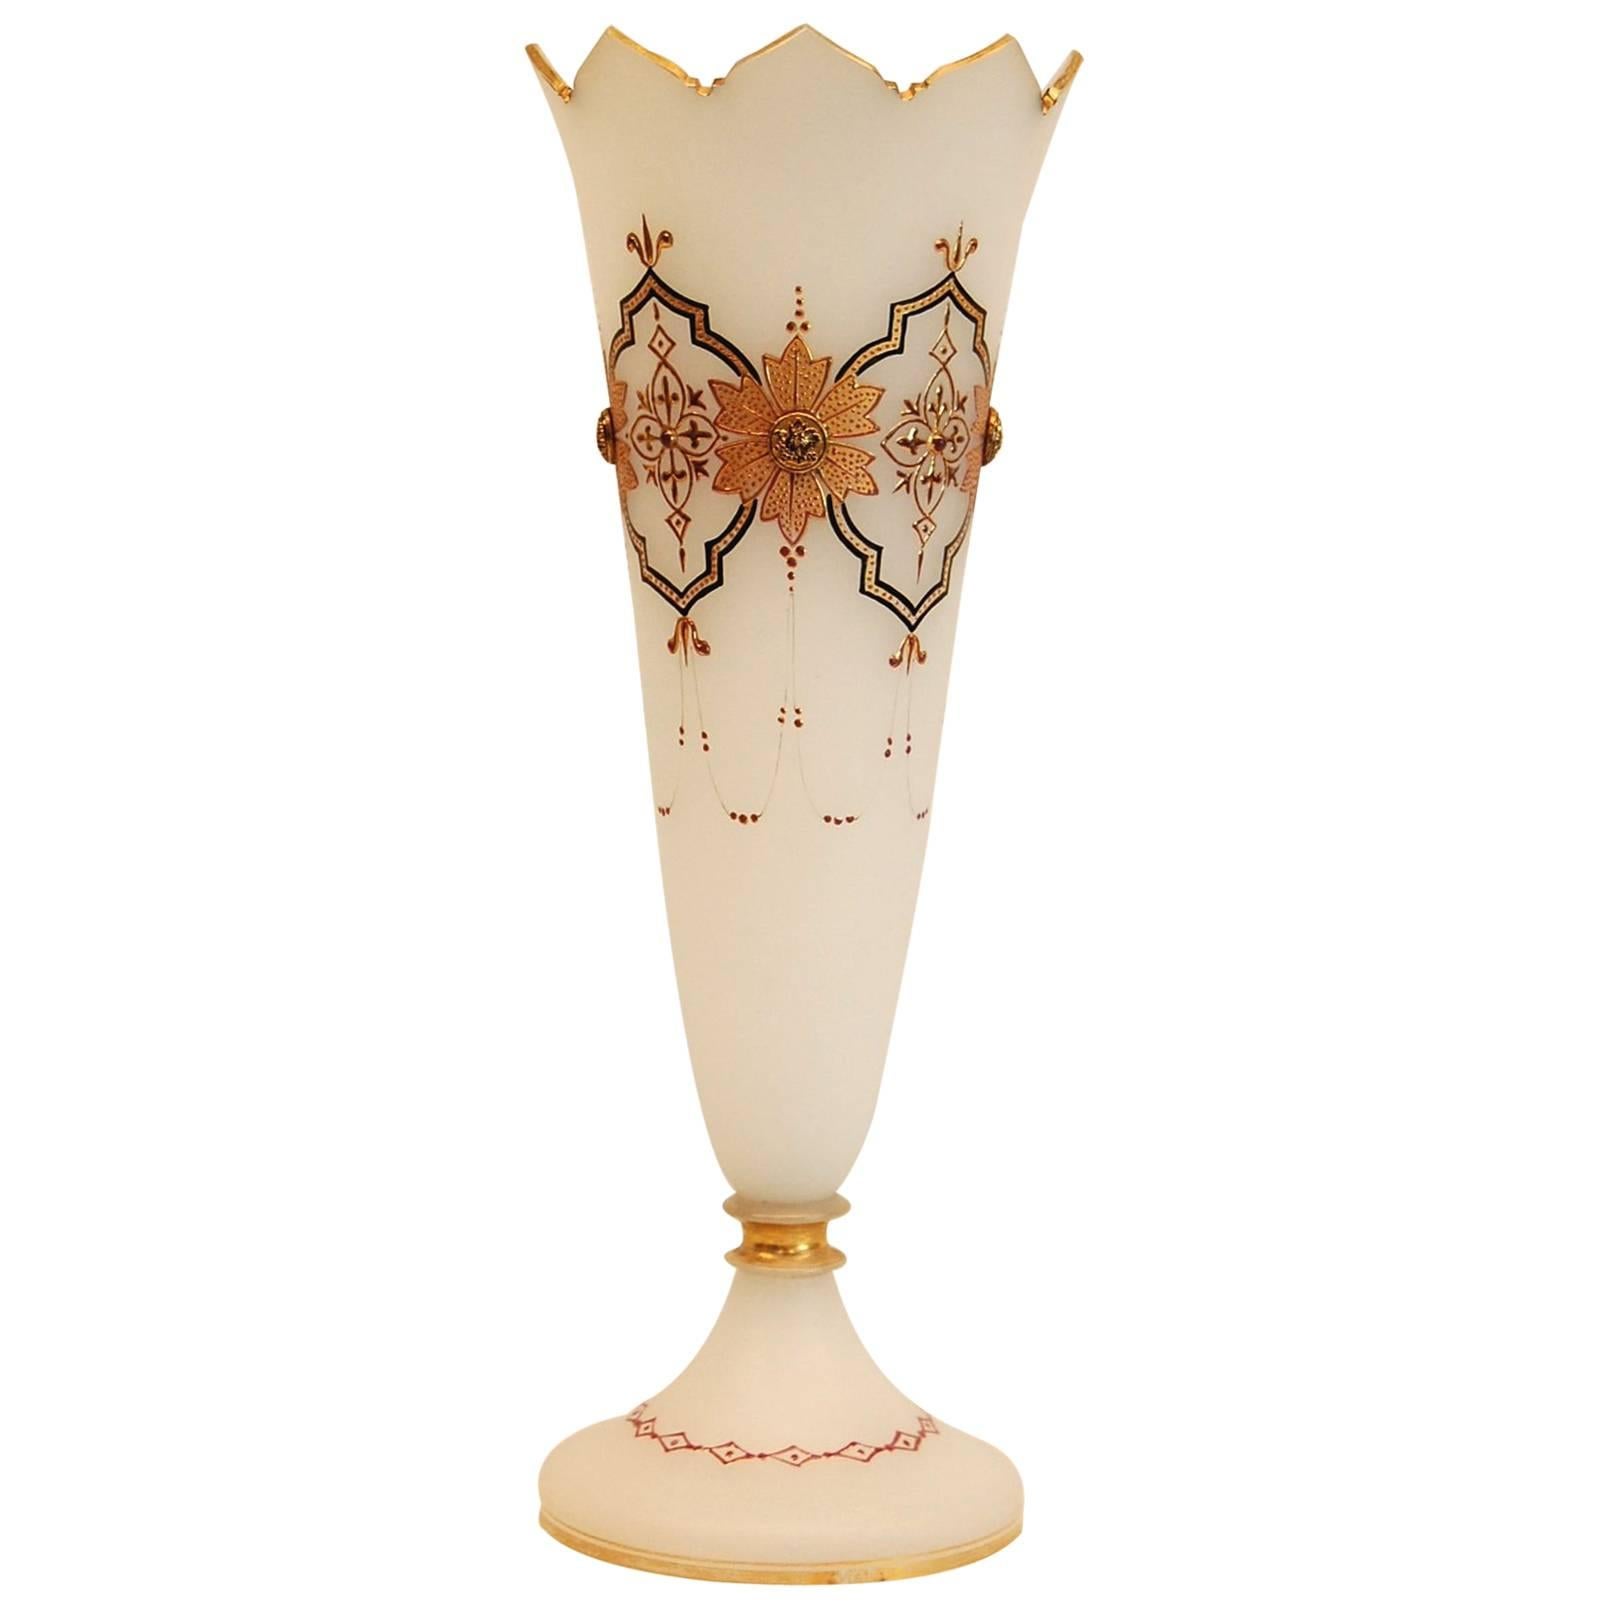 19th Century French Opaline Satin Glass Vase with Raised Gold Decorations